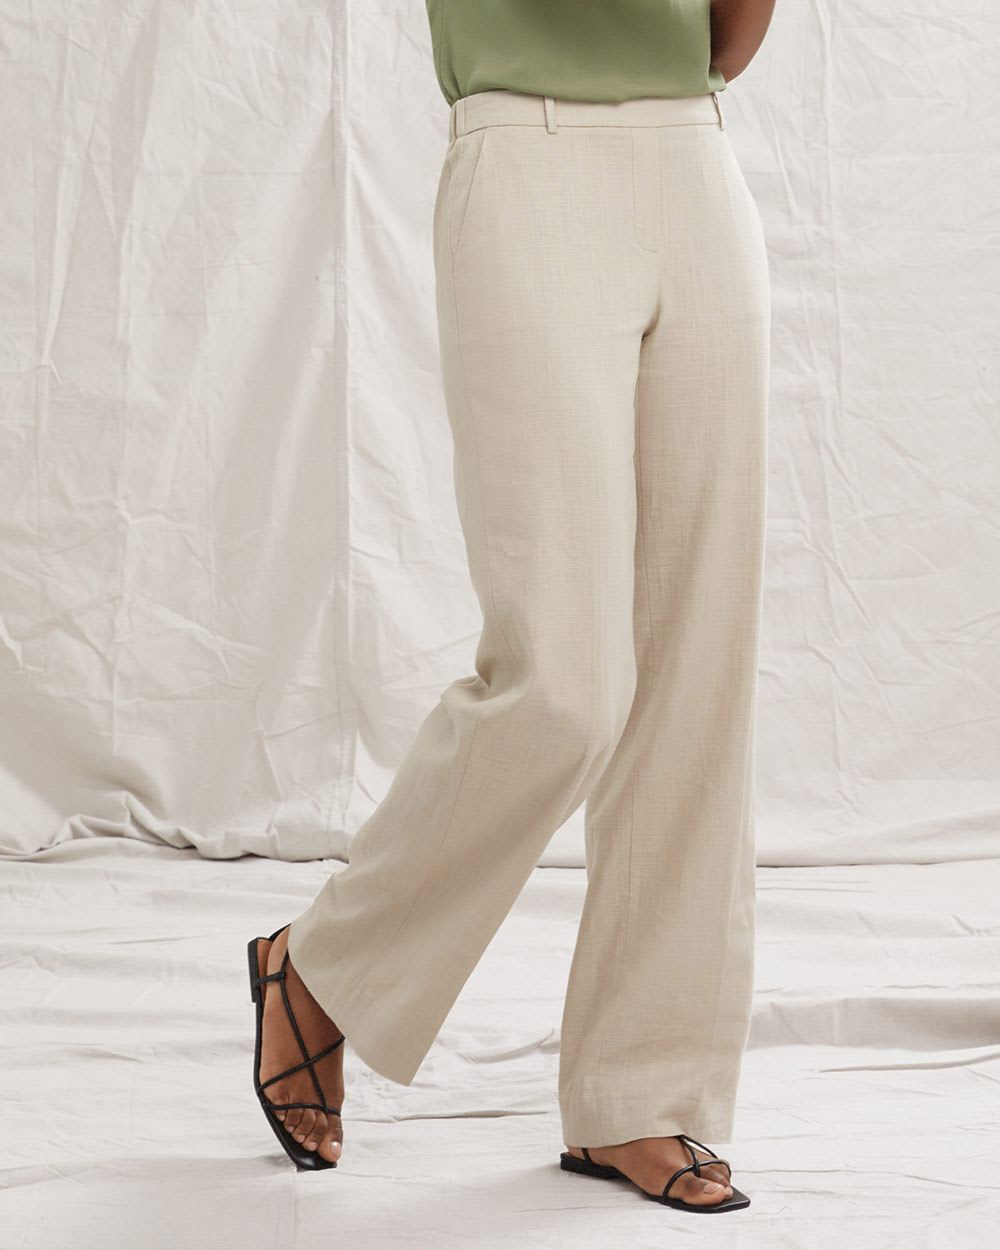 Best White Linen Pants For Women: Versatile And Airy For A, 48% OFF